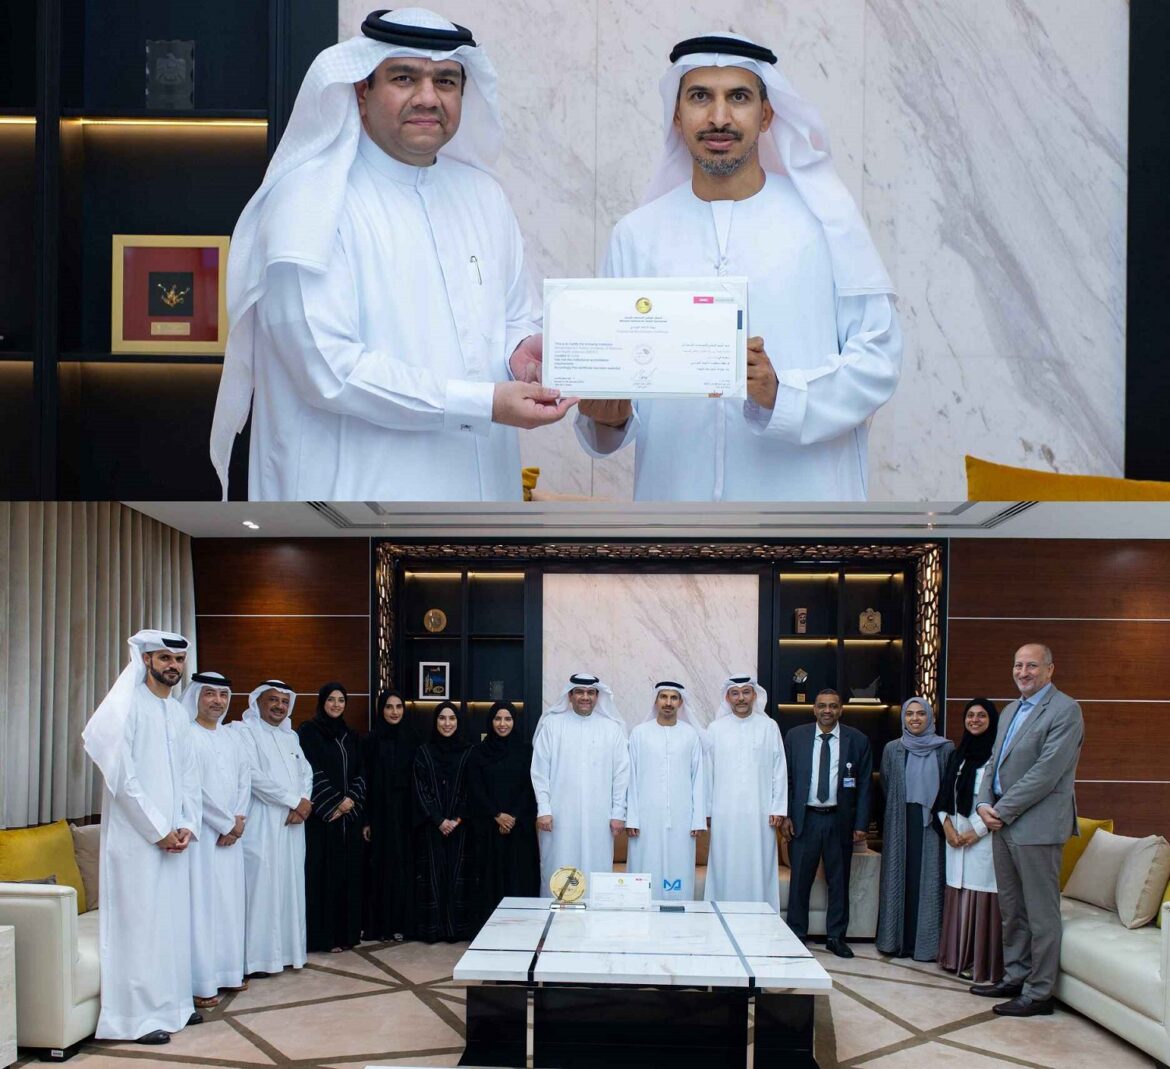 MBRU granted Institutional Accreditation from NIHS